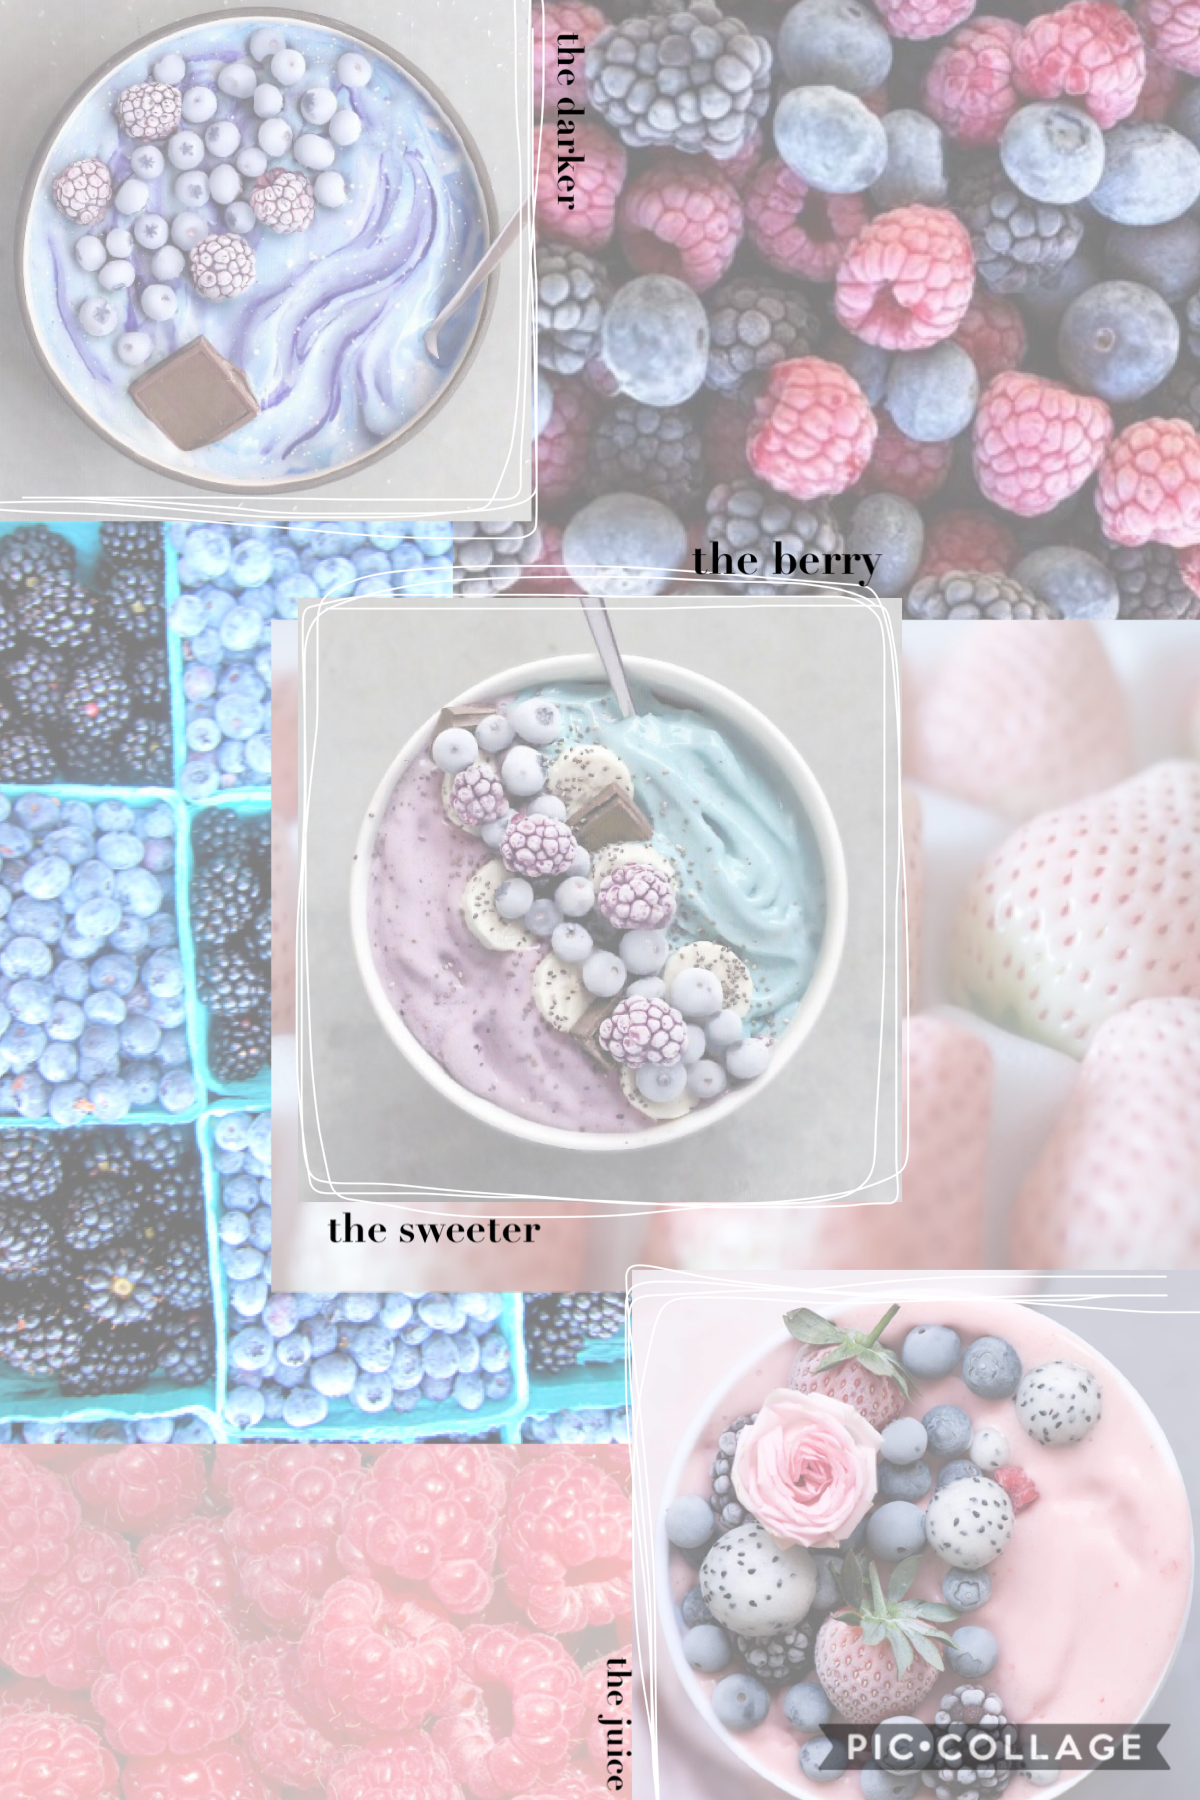 ✨tAp✨
hEy
h0w aRe y0u
this is another old-ish collage 
🥰 i hope you like it 🥰

Q:wHaTs YoUr FaVoRiTe FrUiT¿?
A:💫🍑pEaChEs🍑💫